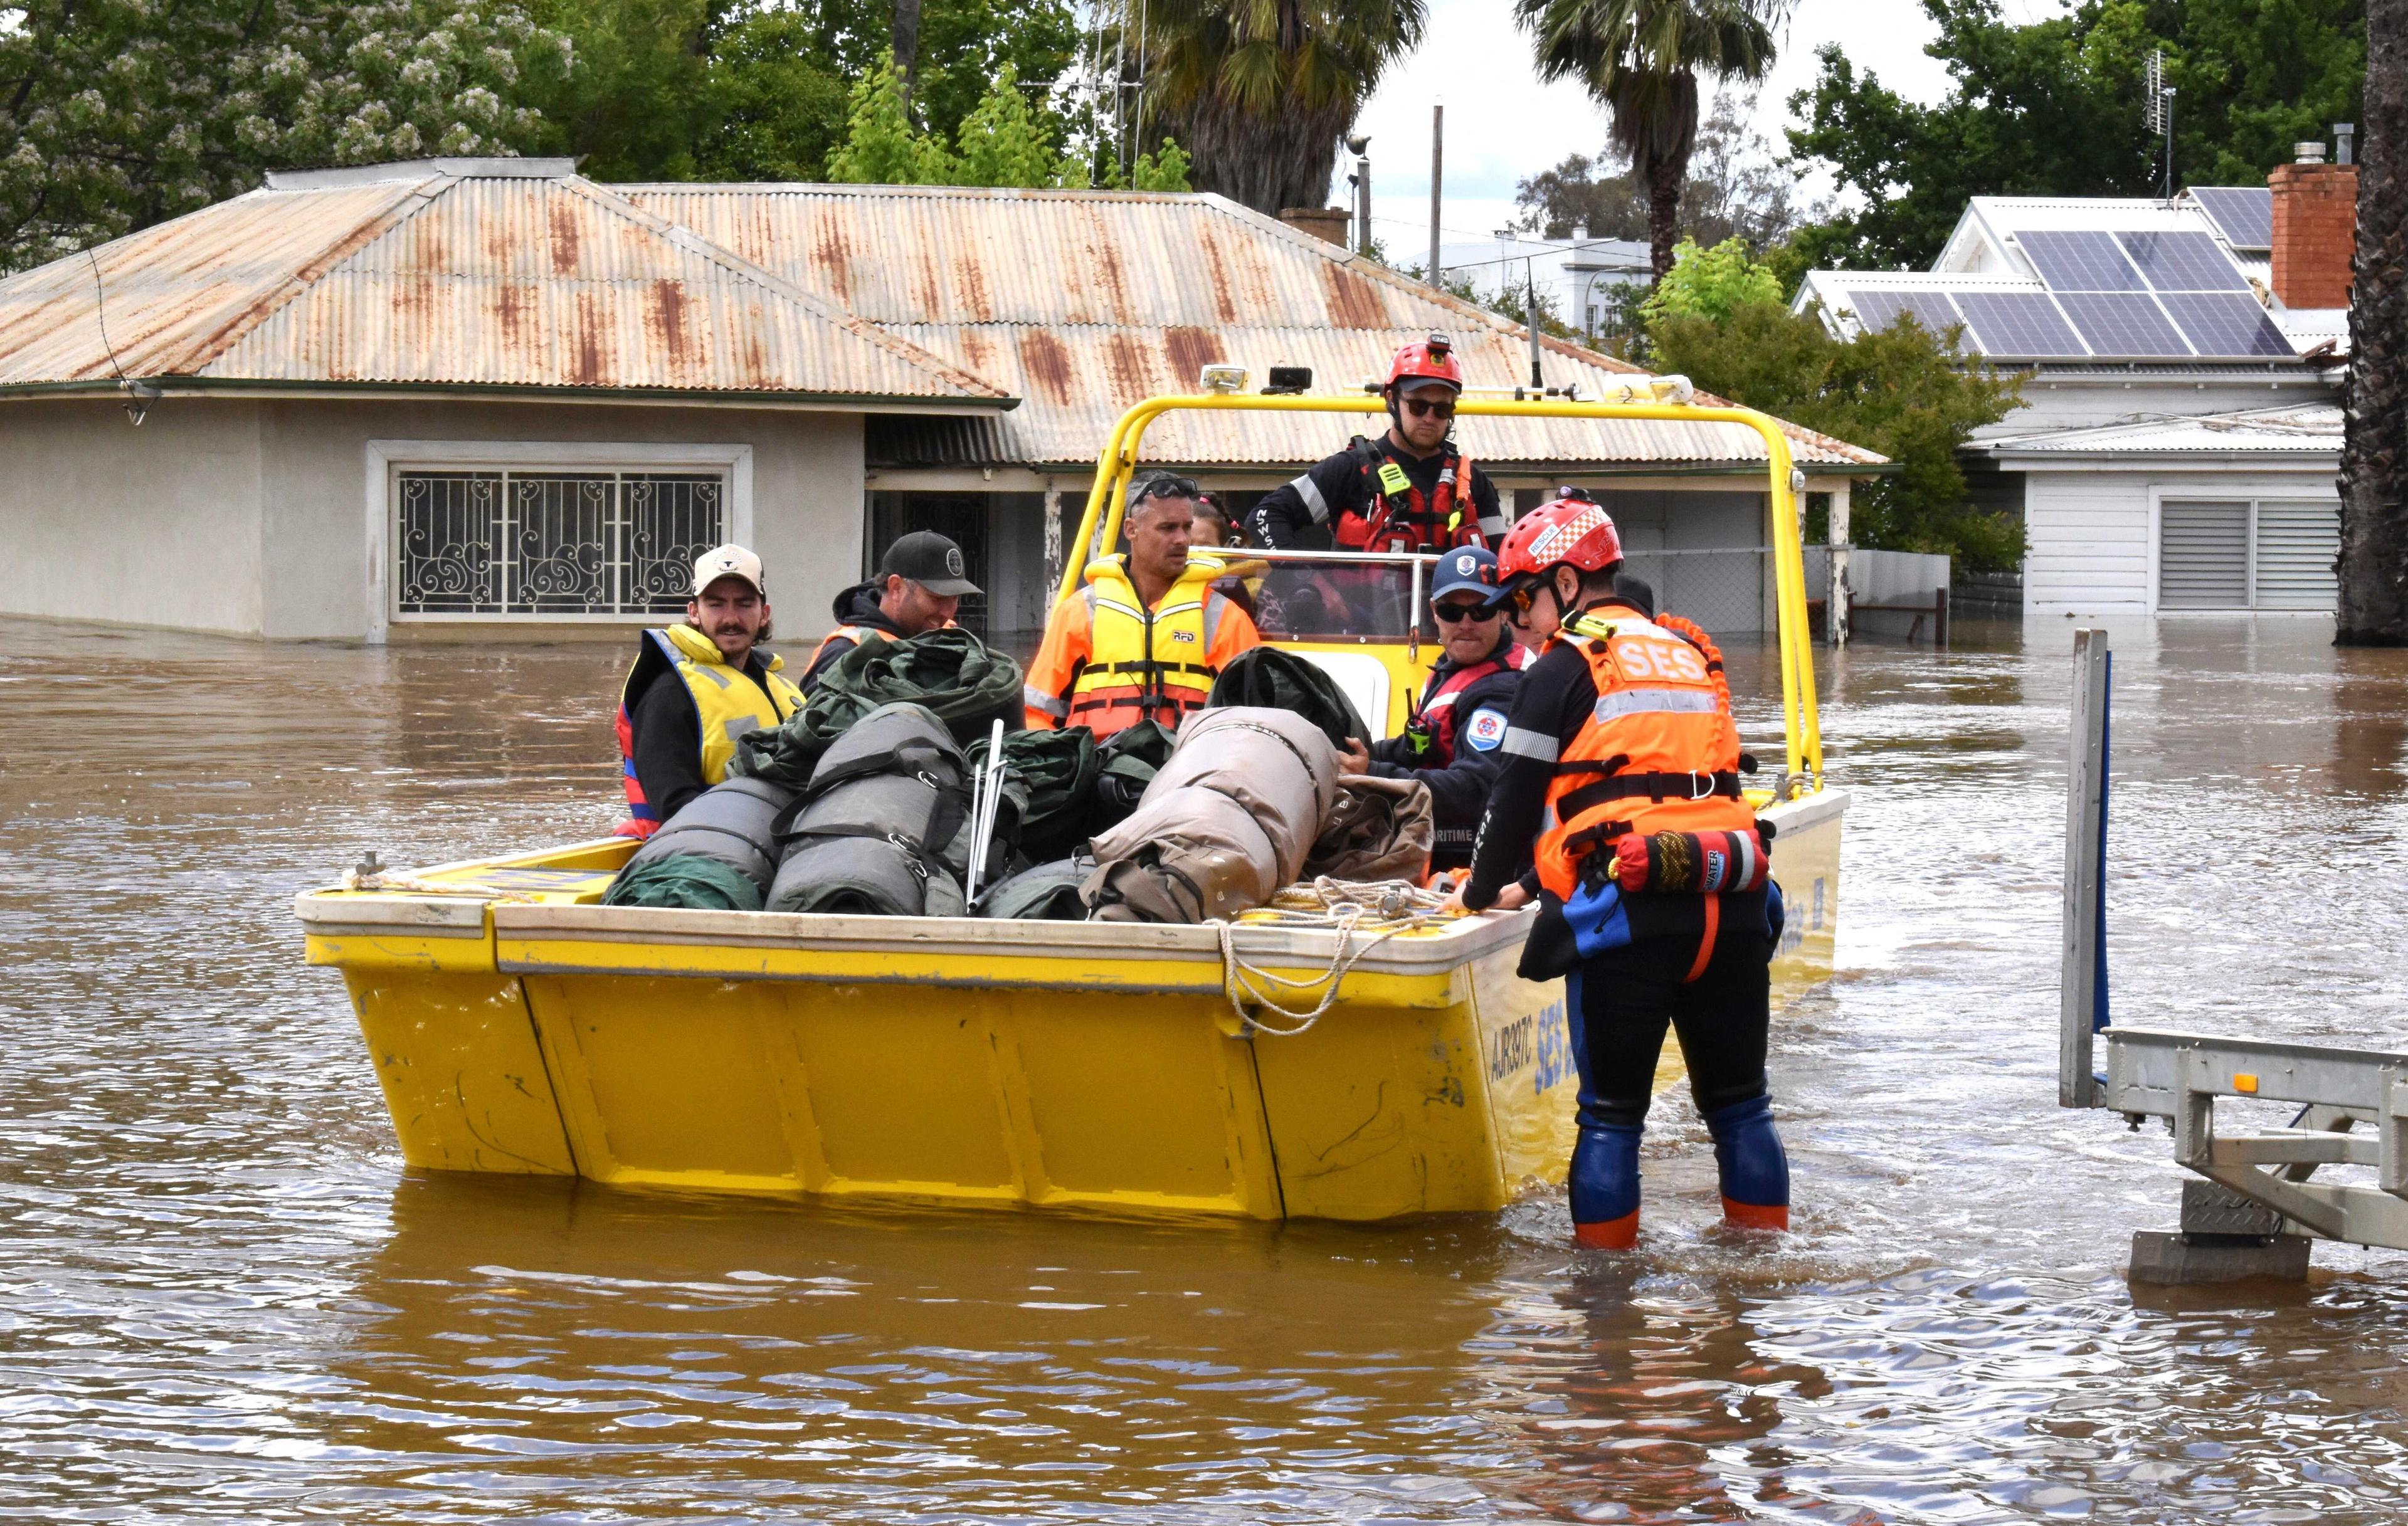 State Emergency Service personnel navigate floodwaters with residents and supplies aboard a watercraft at the town of Forbes, in the Central West region of New South Wales, Australia, Nov 16. Photo: Reuters